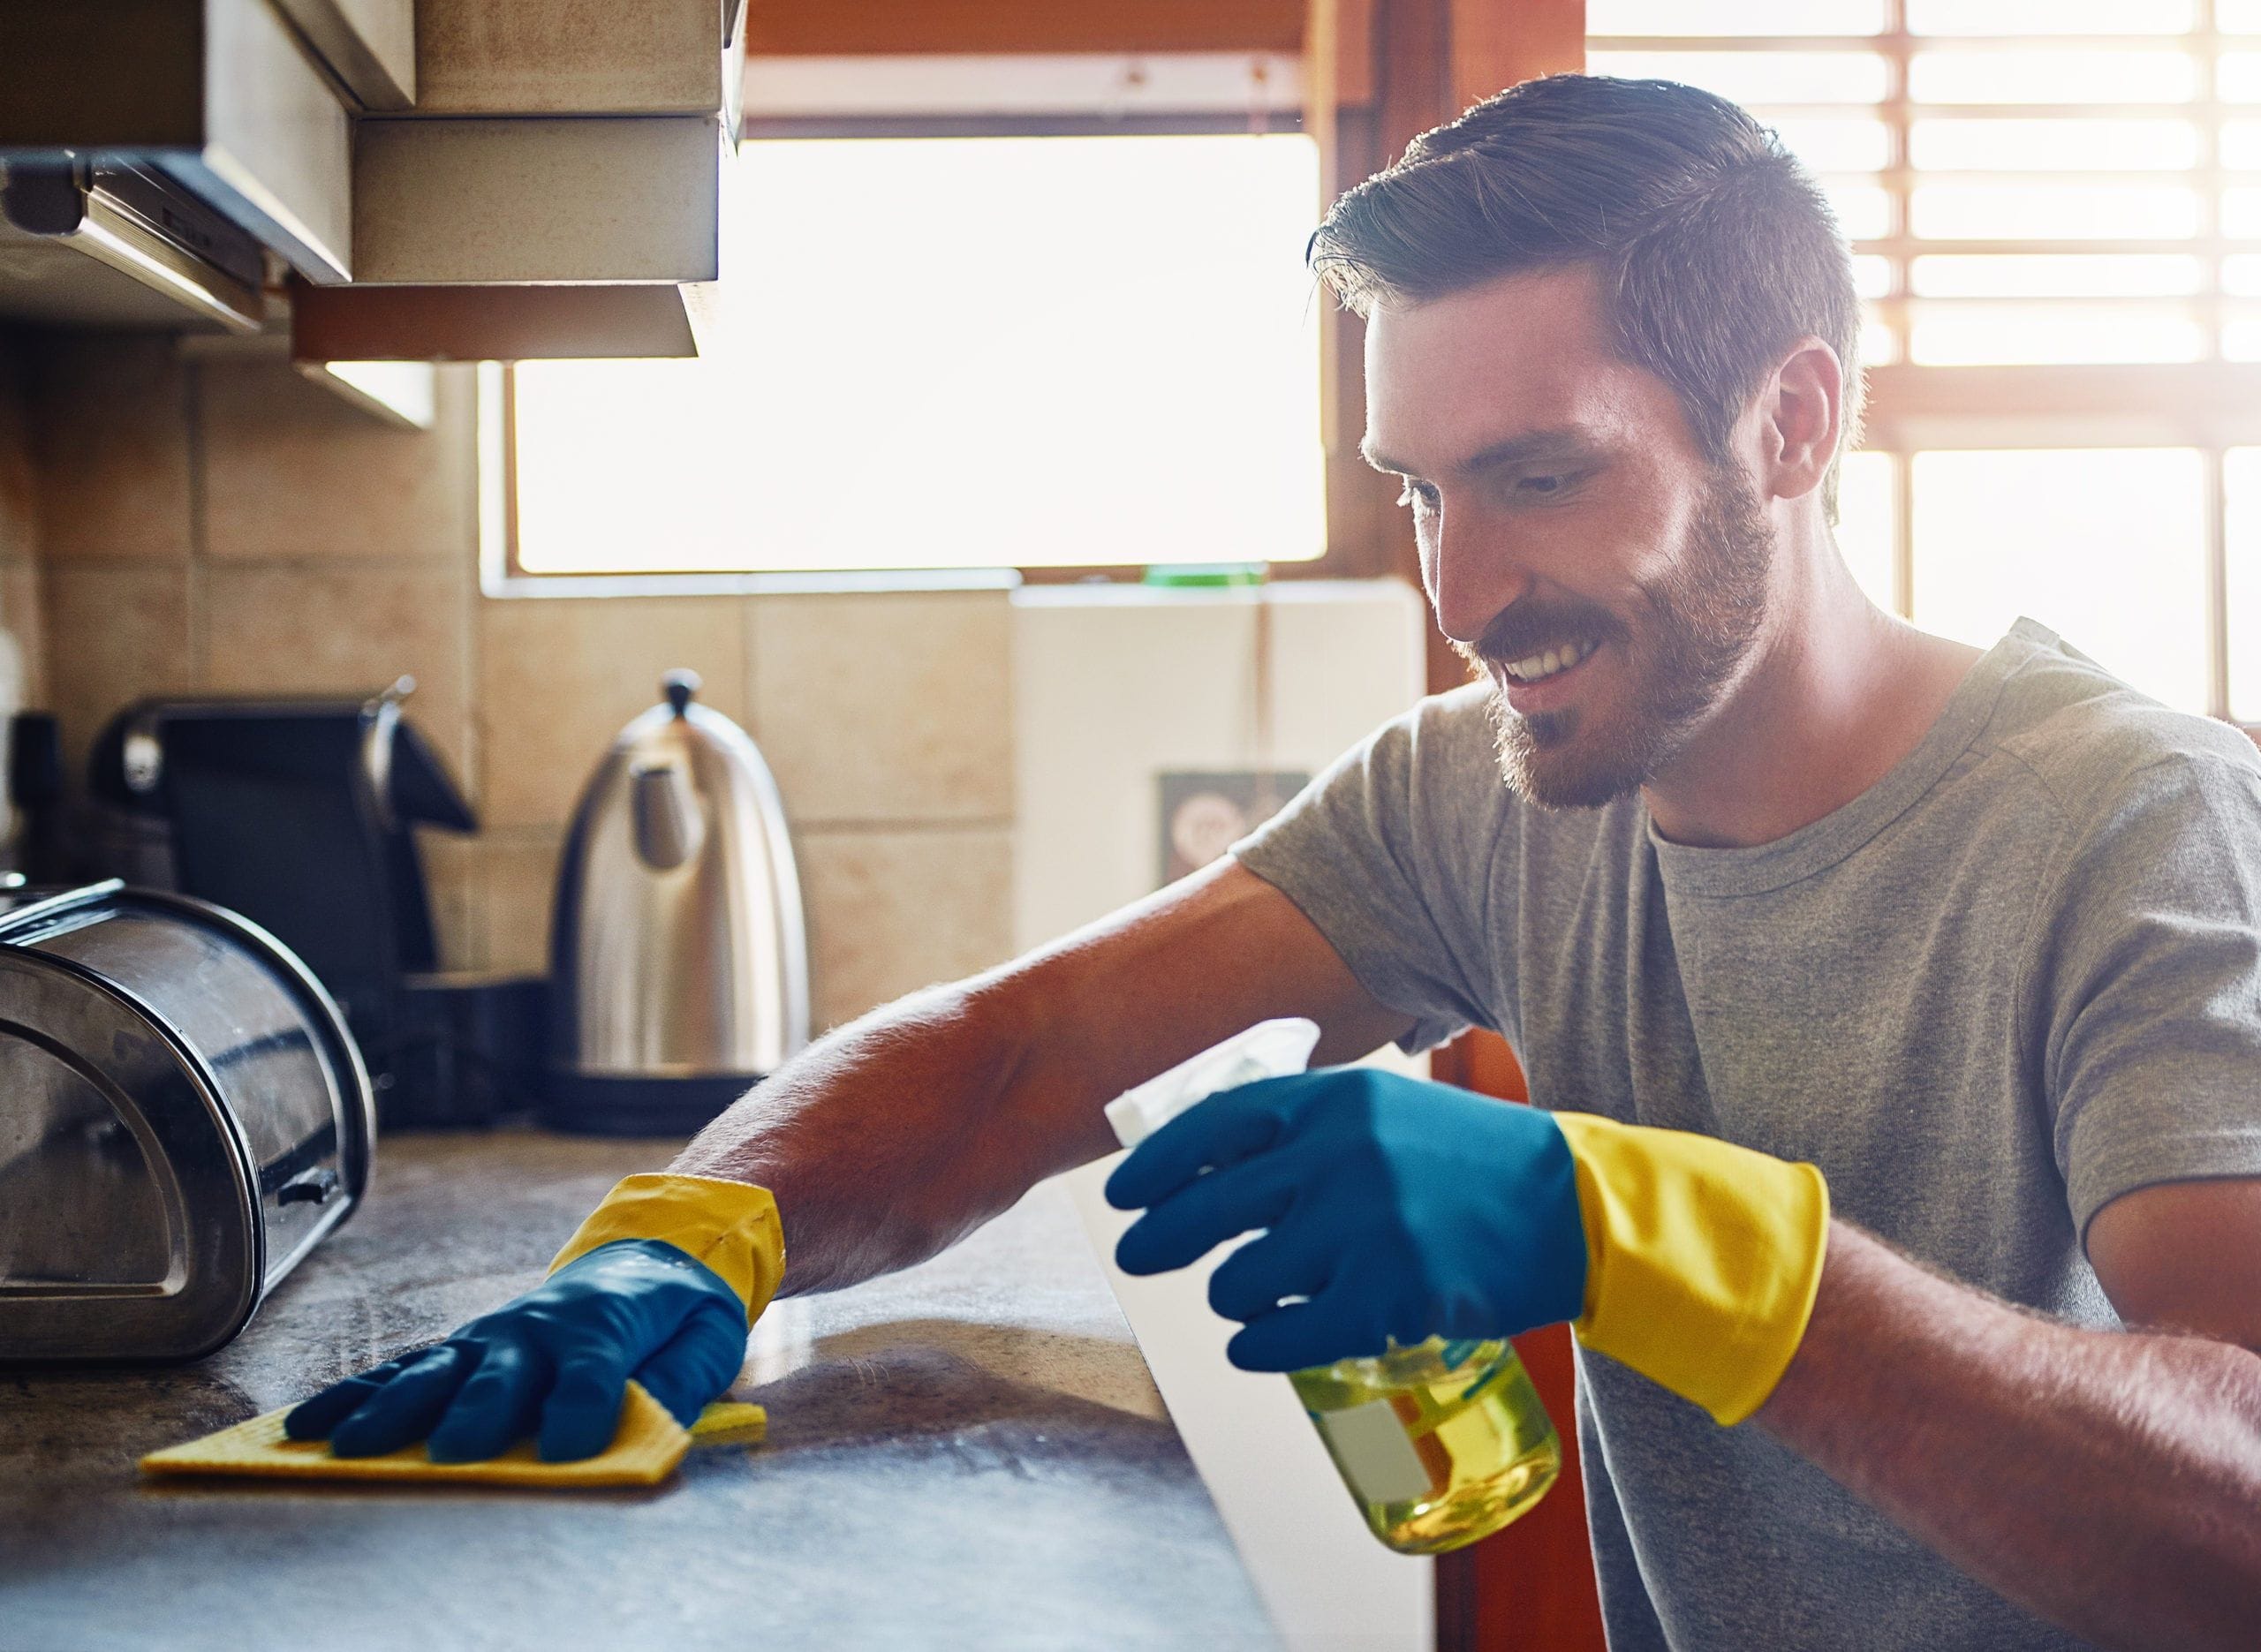 101 Odd Jobs You Can Hire Someone Else to Do